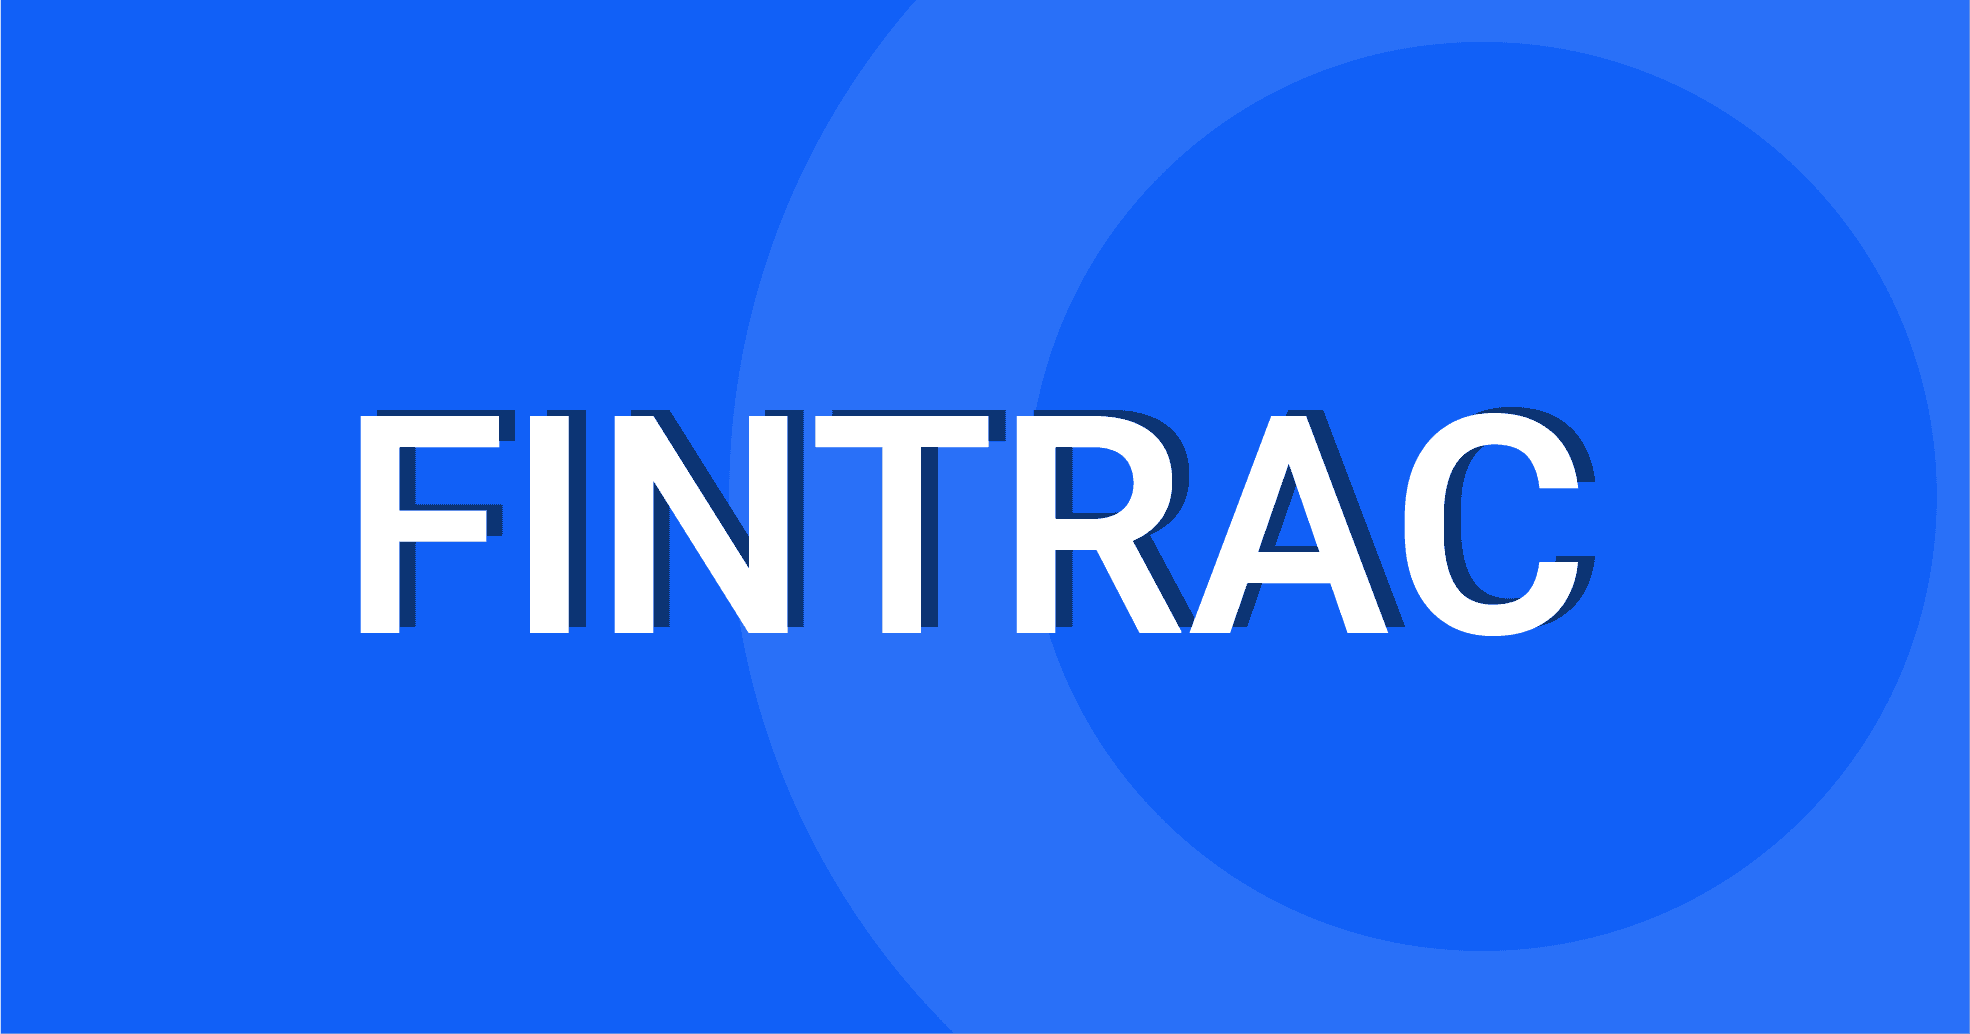 What is FINTRAC?